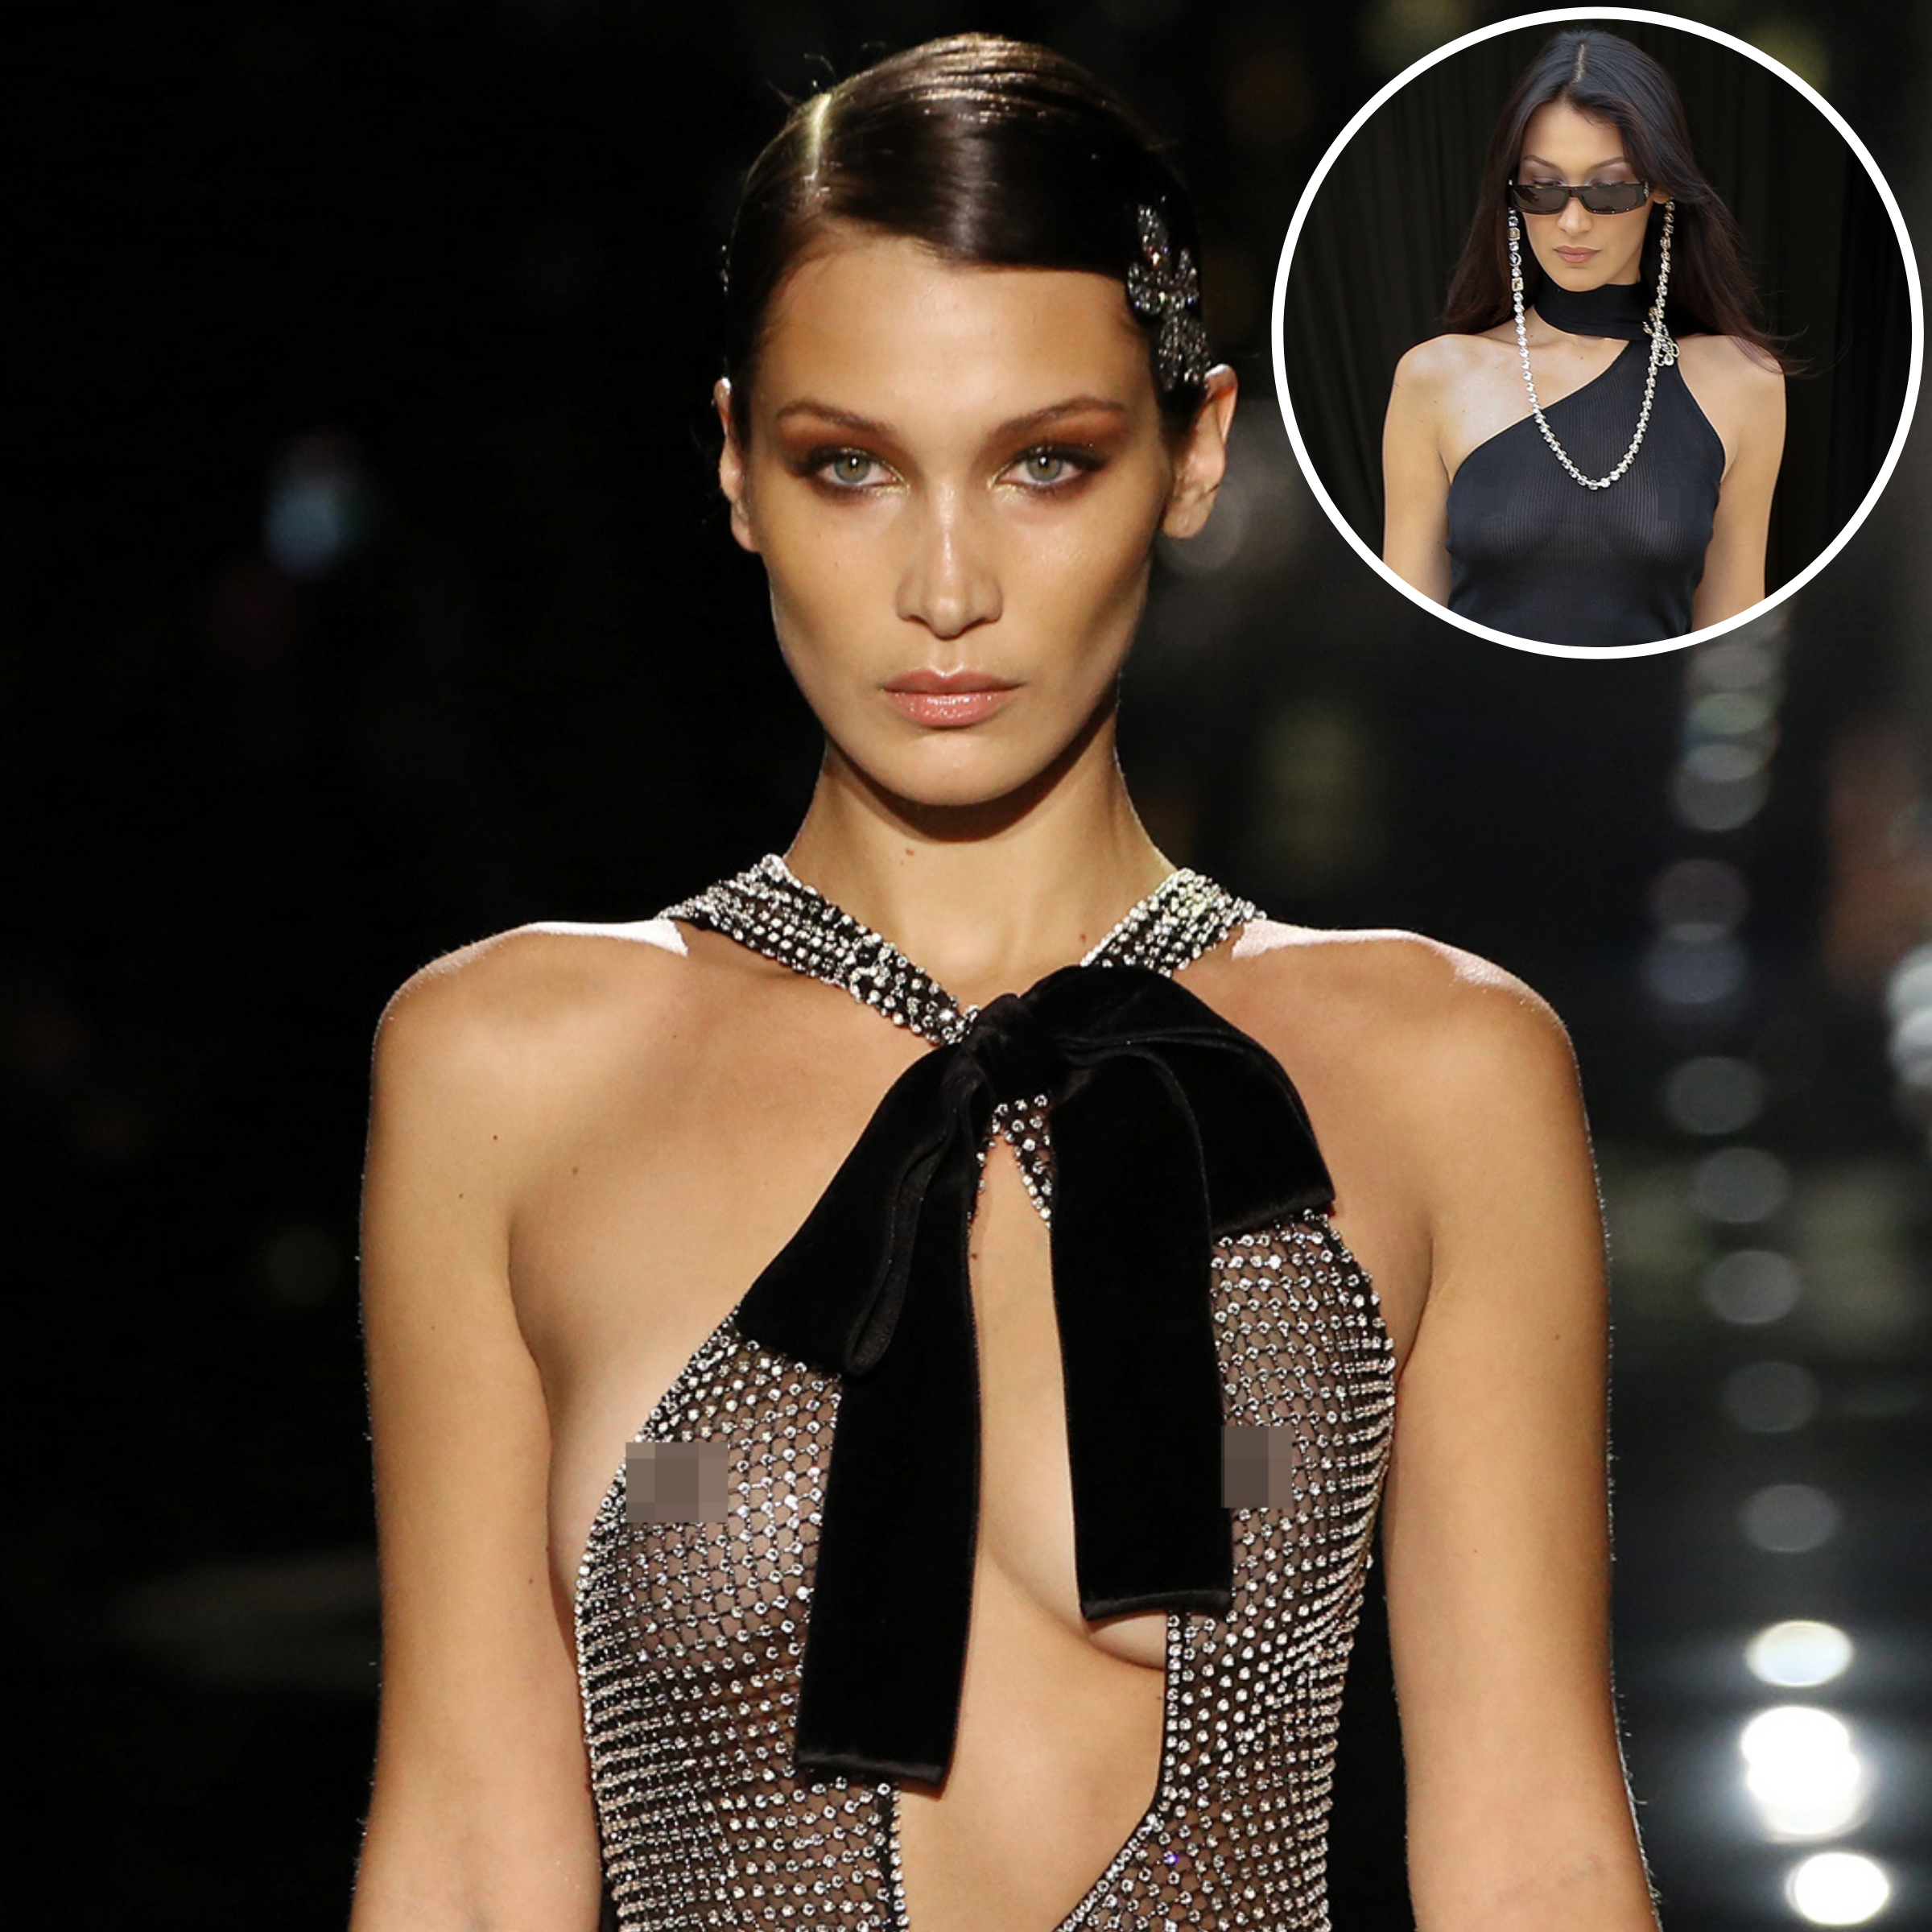 https://www.intouchweekly.com/wp-content/uploads/2021/07/Bella-Hadid-Braless-Feature.jpeg?fit=2400%2C2400&quality=86&strip=all